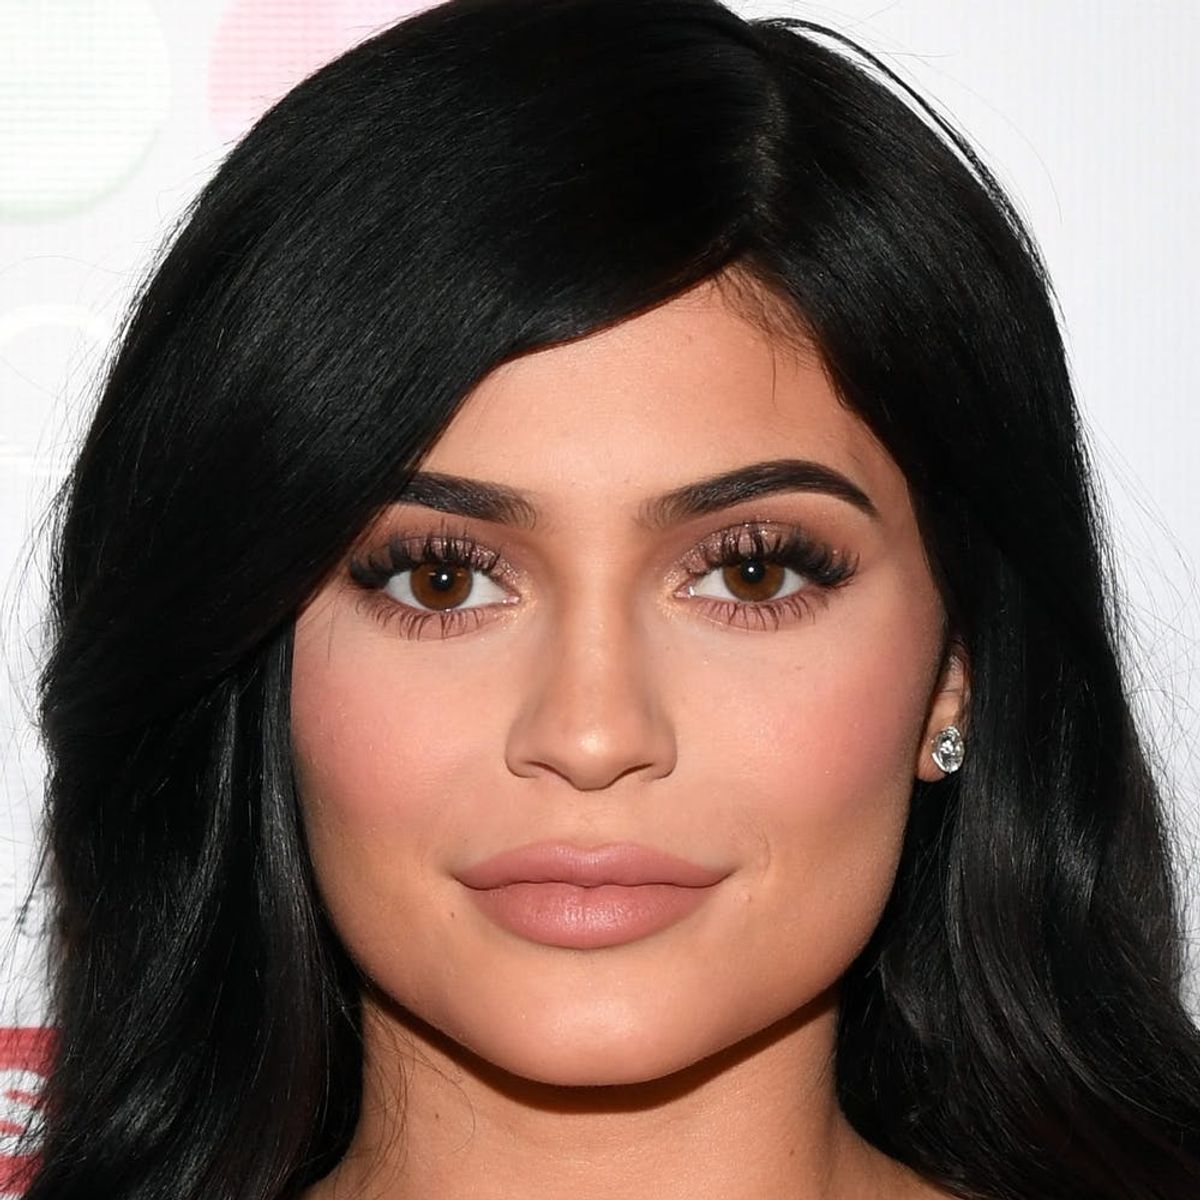 Celebs Like Kylie Jenner Are Embracing Therapy. Here’s Why It’s a Good Idea